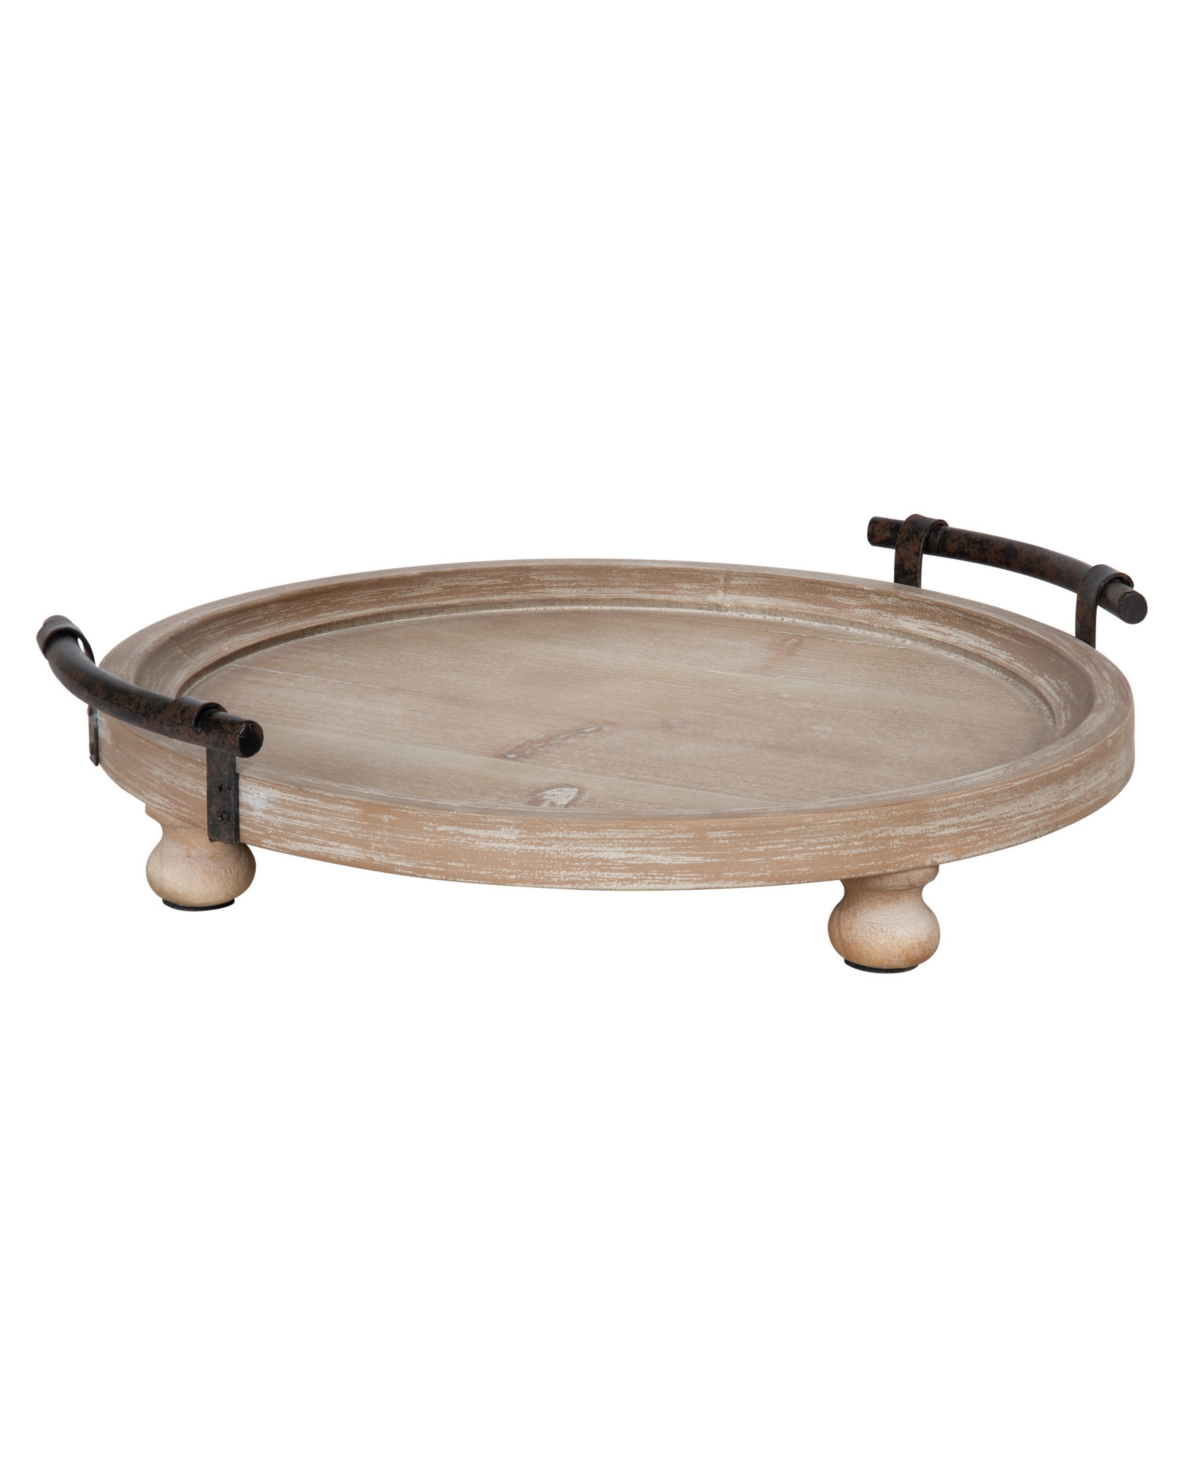 Kate And Laurel Bruillet Round Wooden Footed Tray In Medium Bro